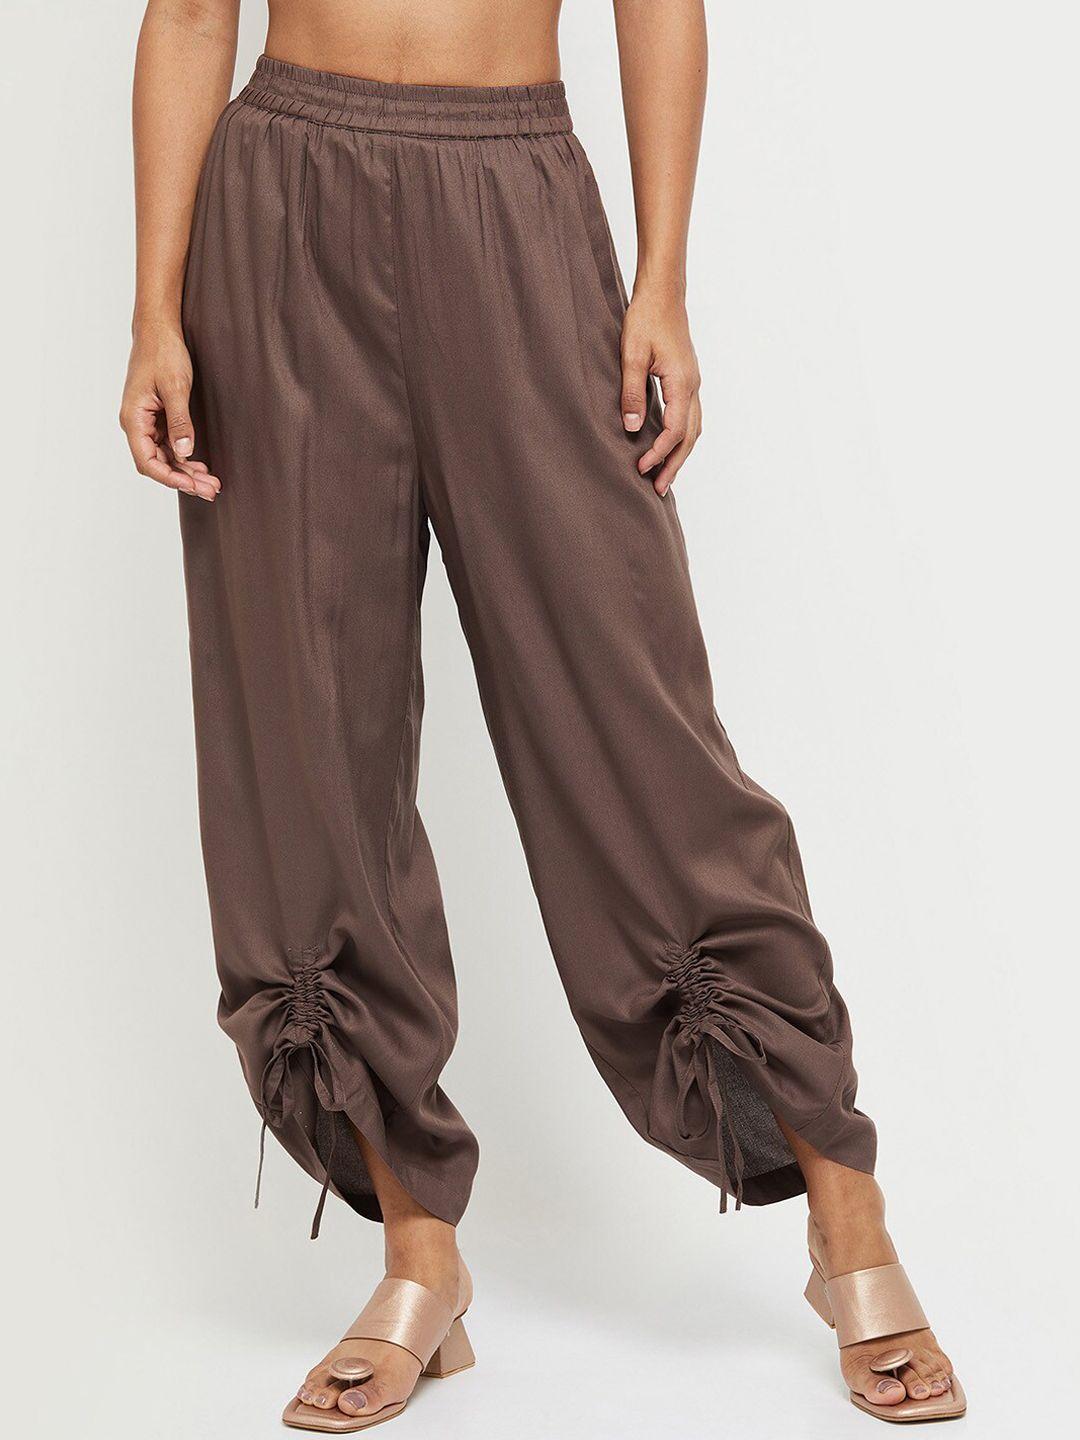 max women brown ethnic palazzos with tie up hem